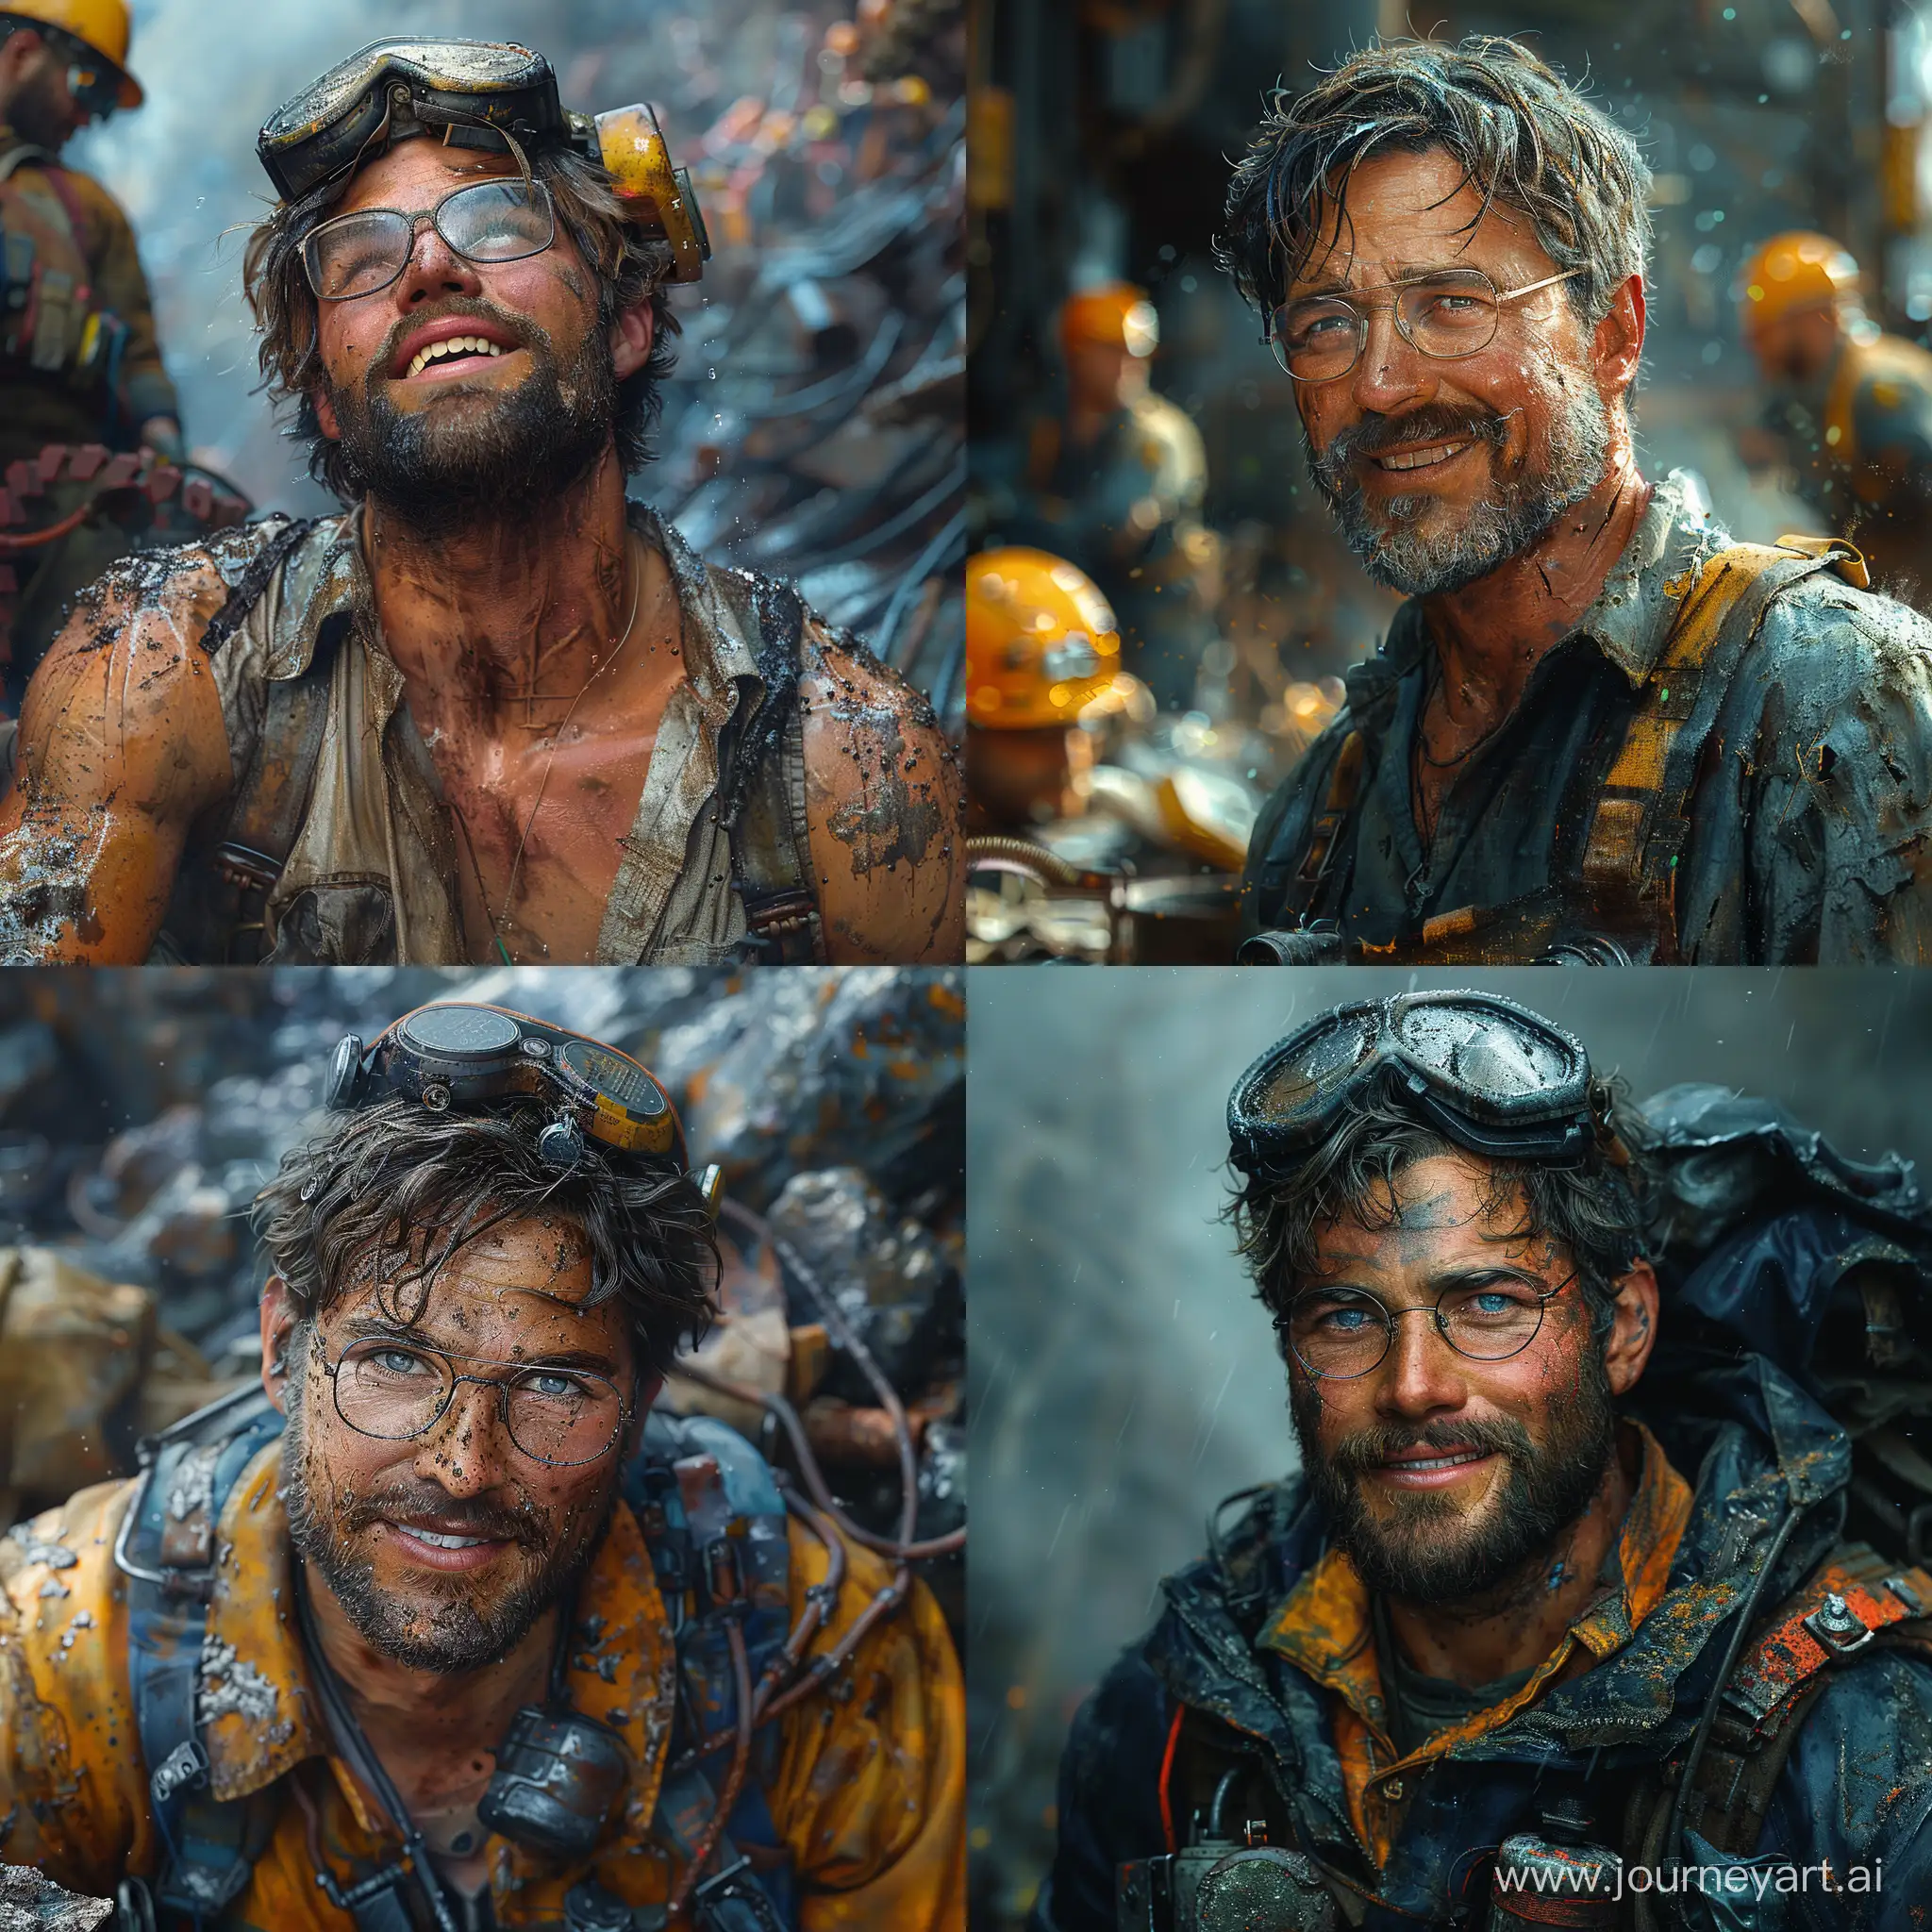 Muscular-Miner-Wearing-Glasses-in-Realistic-Style